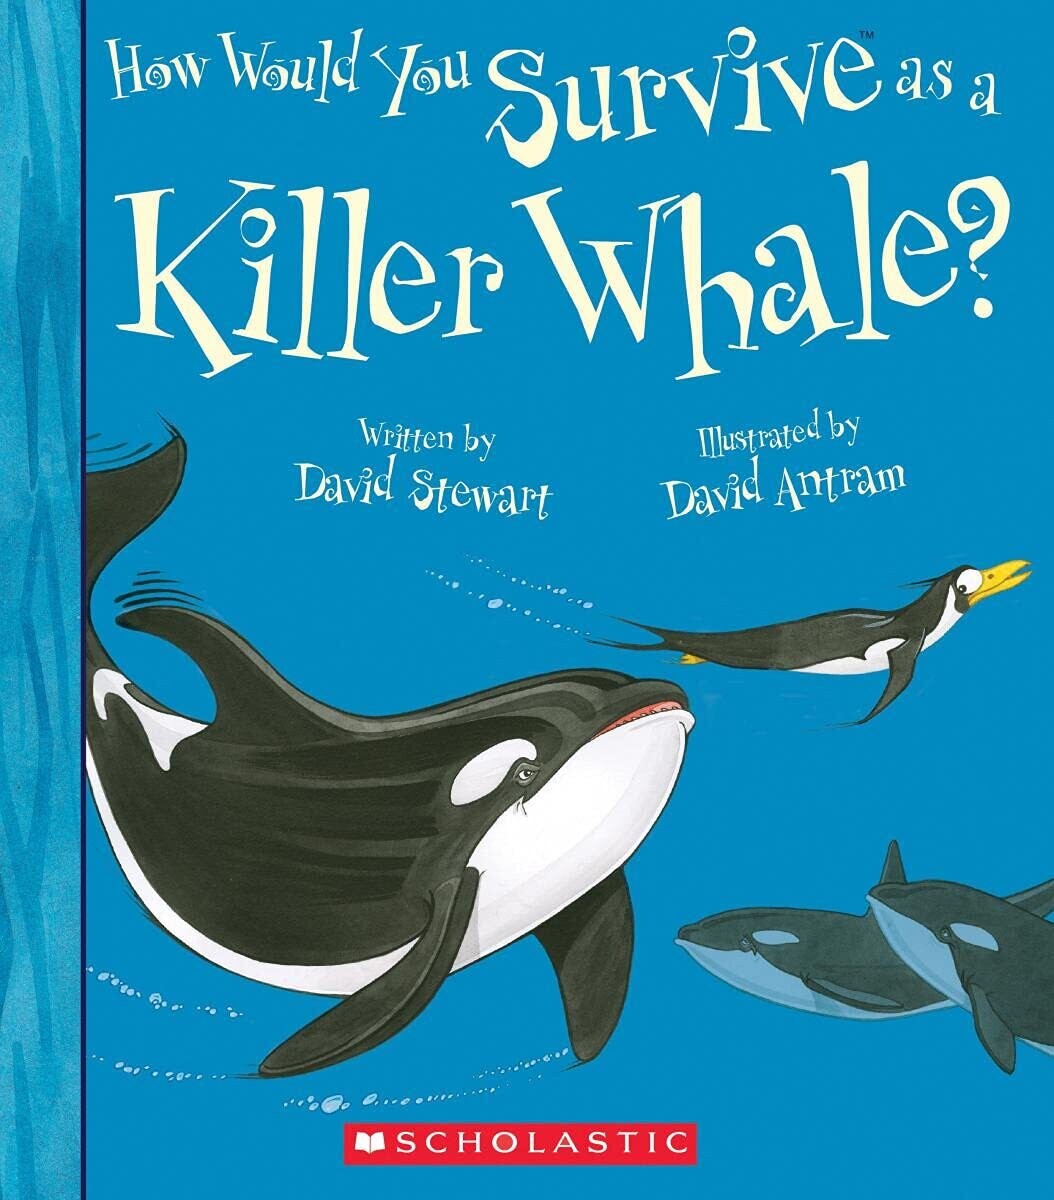 How Would You Survive as a Killer Whale?